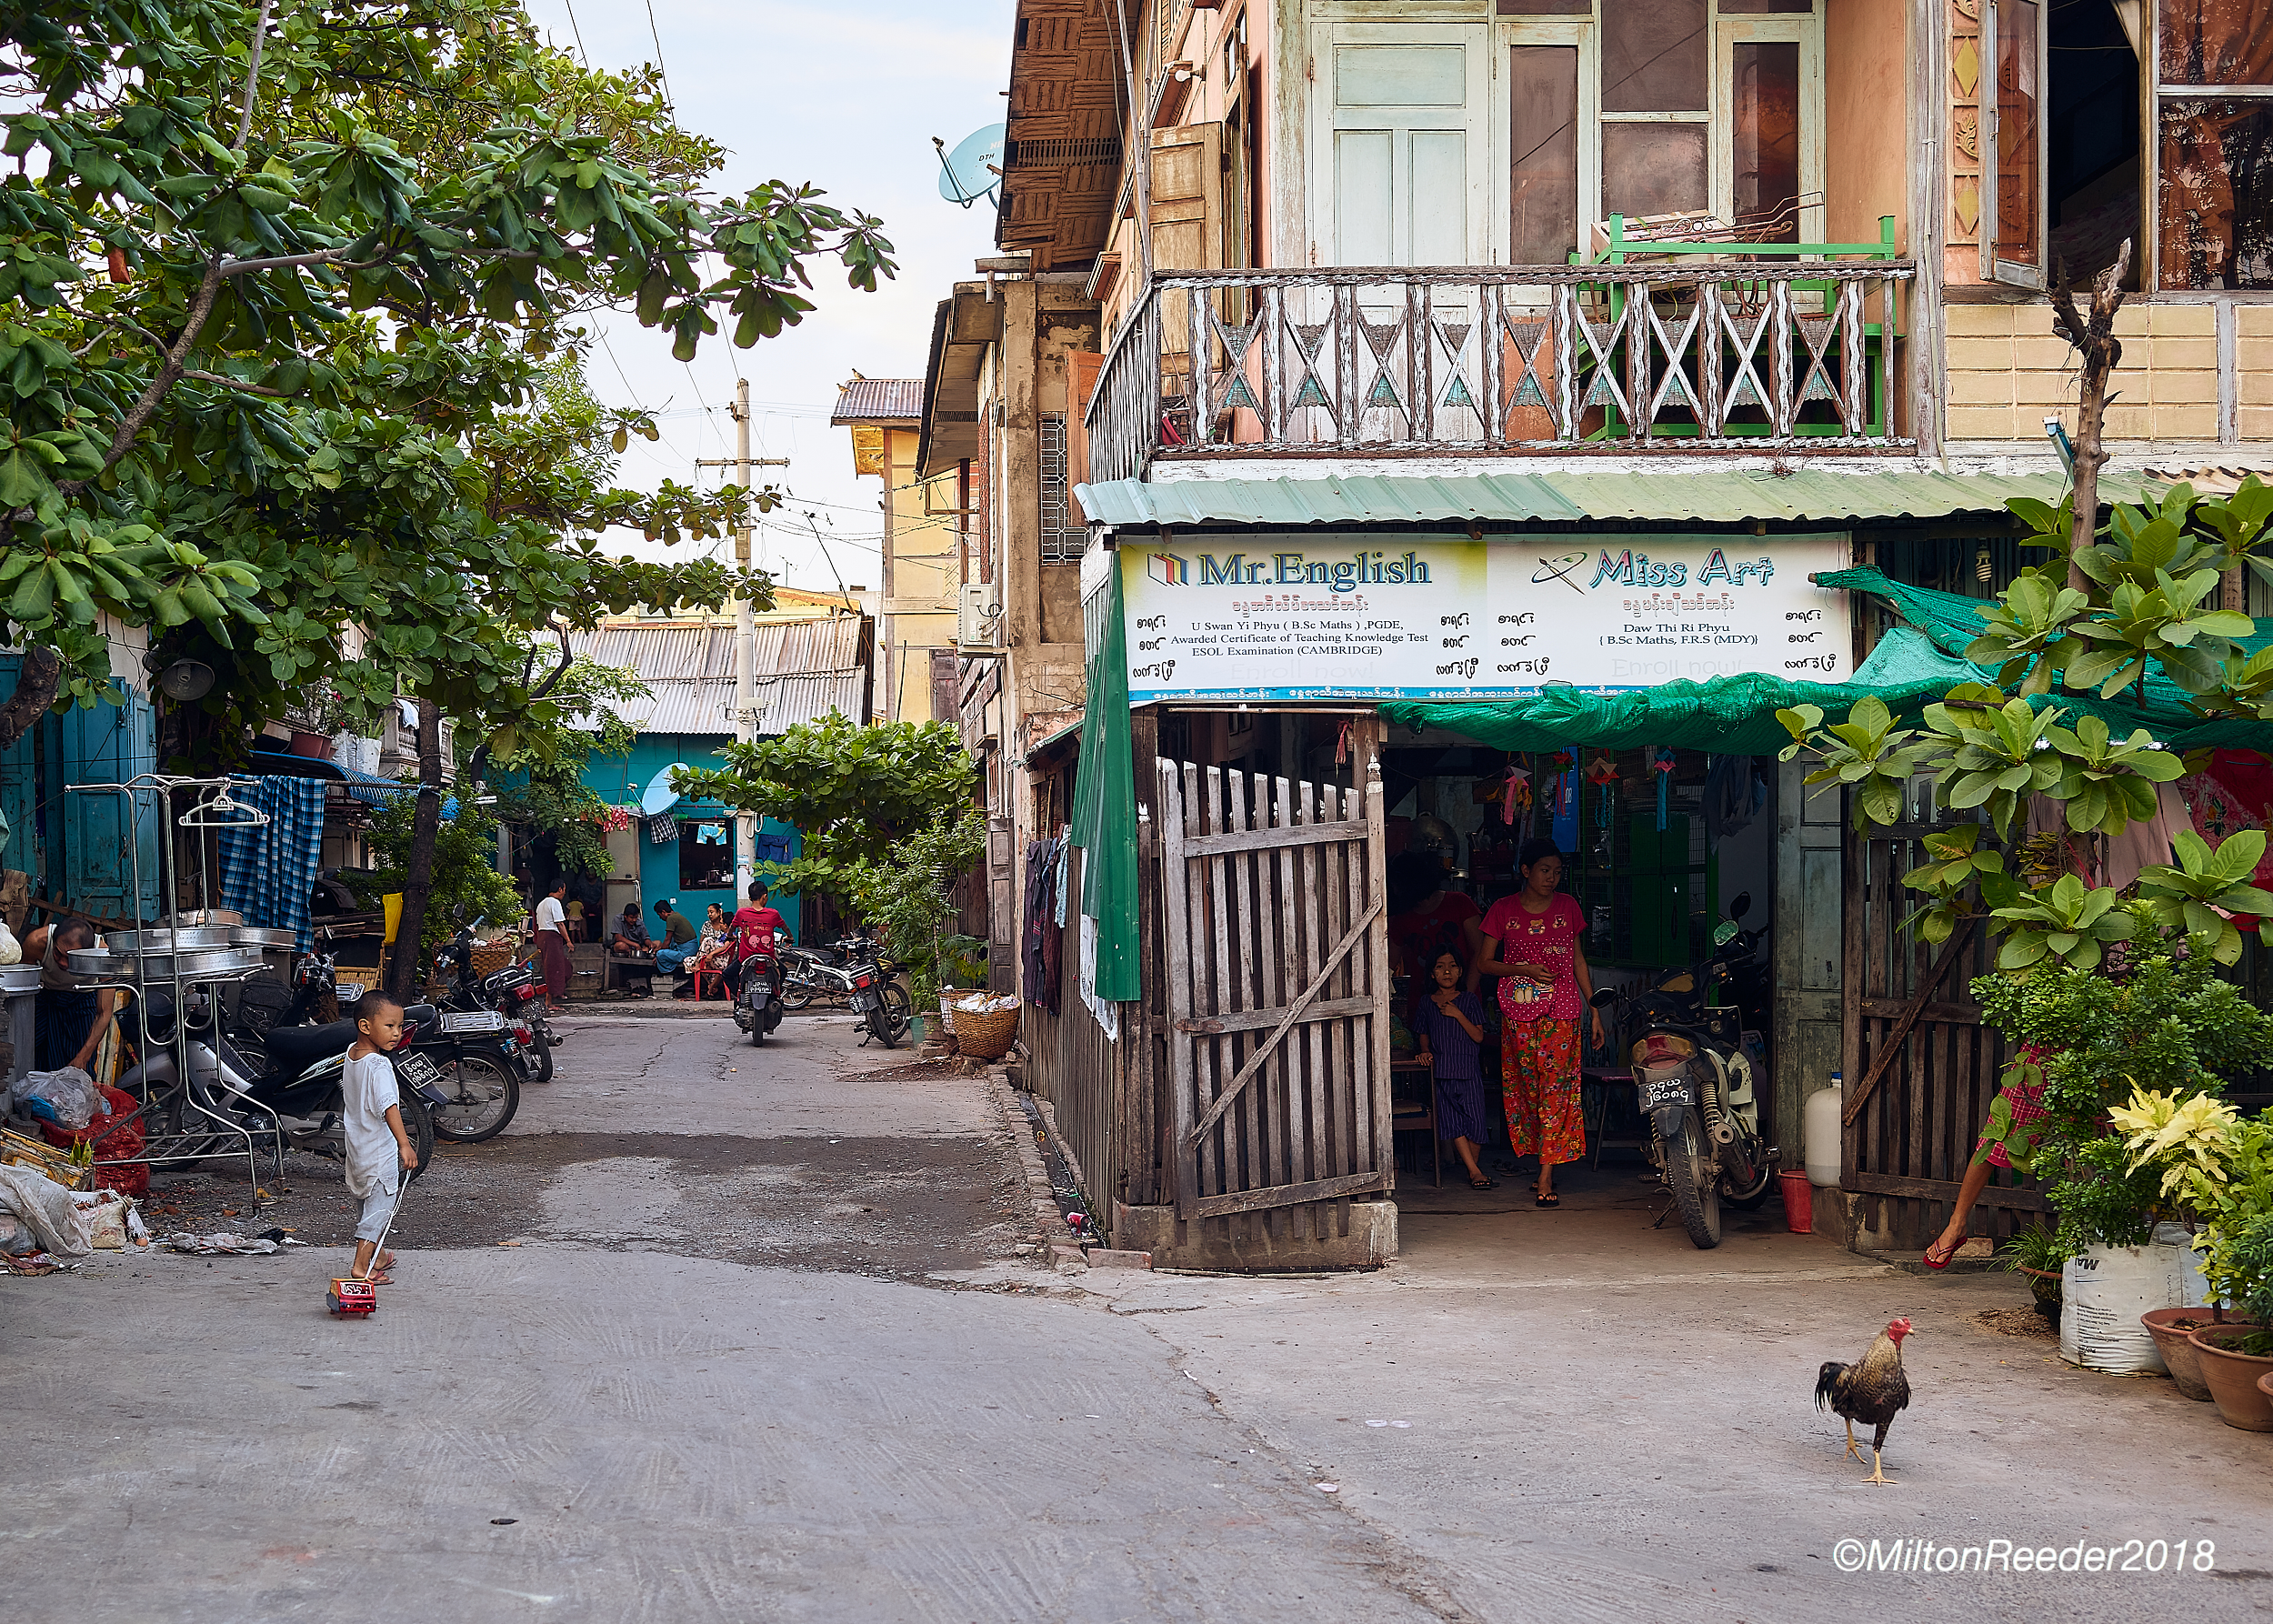 Boy and Rooster, Mandalay, Myanmar